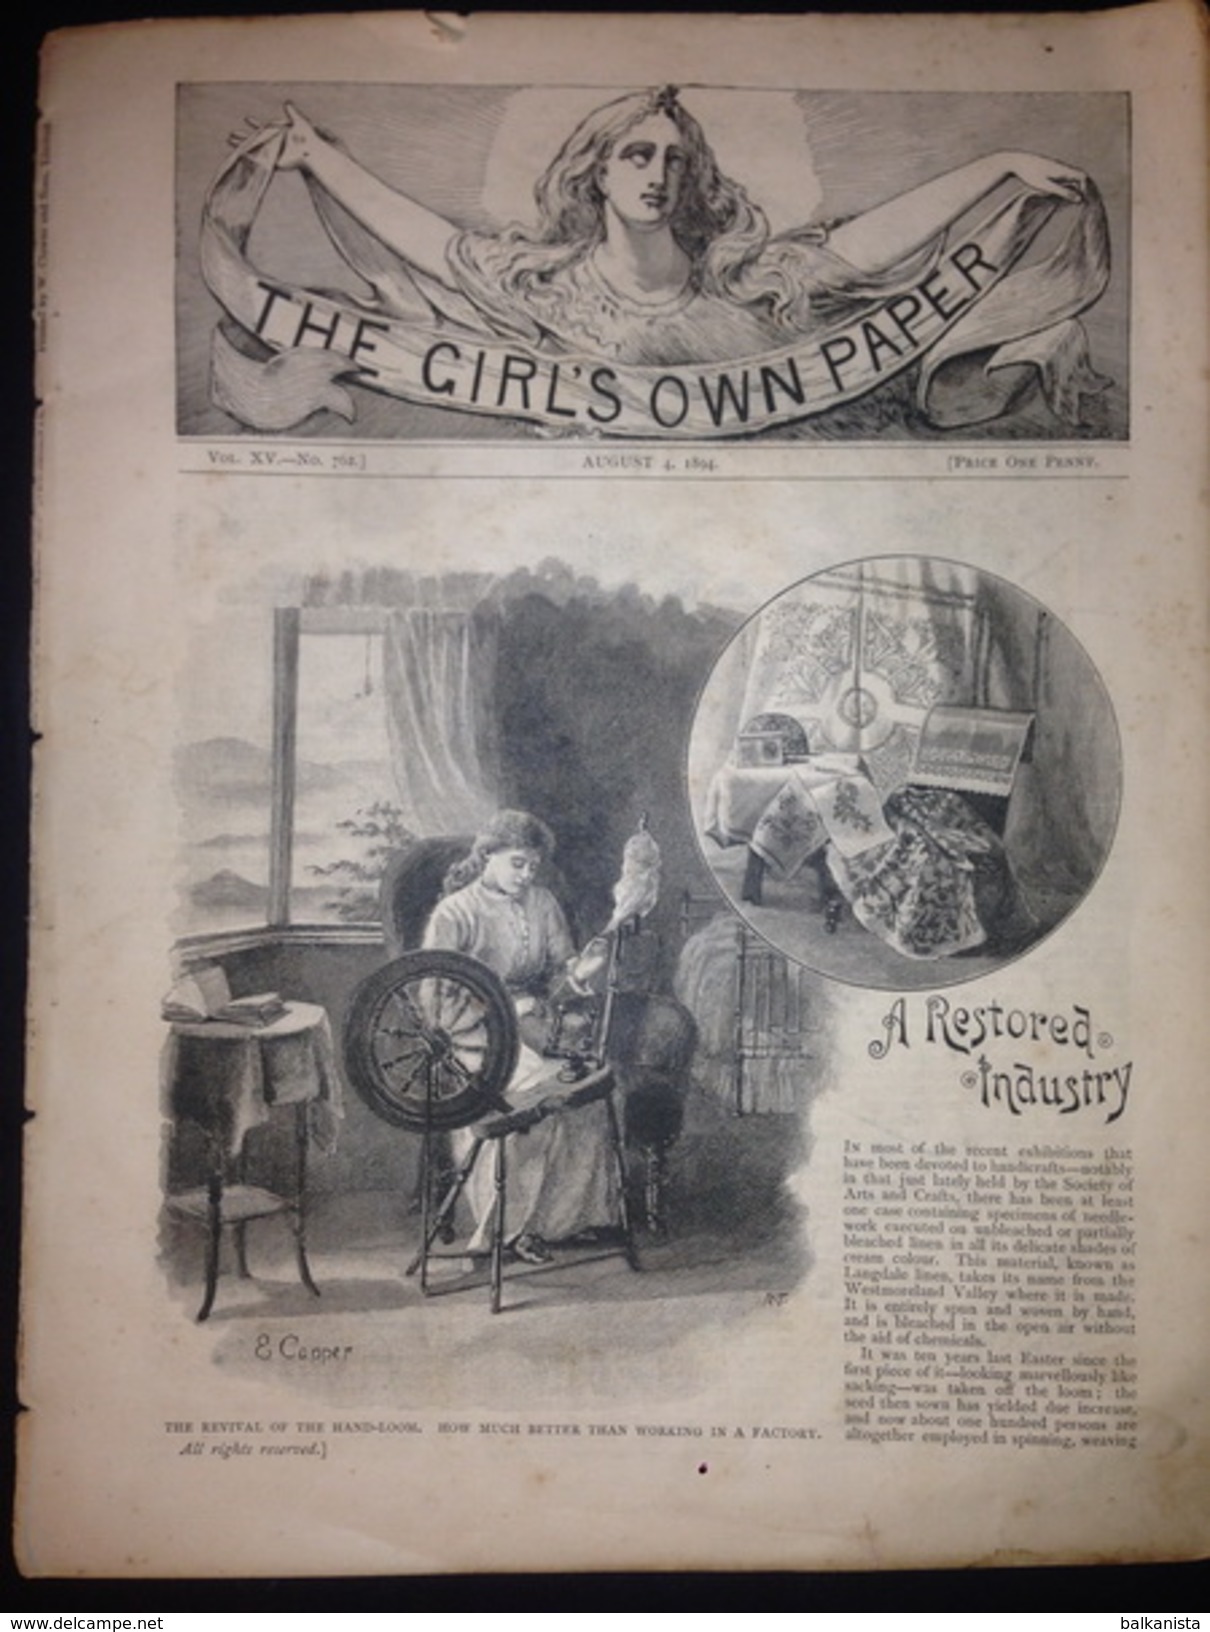 The Girl's Own Paper August 4, 1894 No: 762 - Pour Femmes